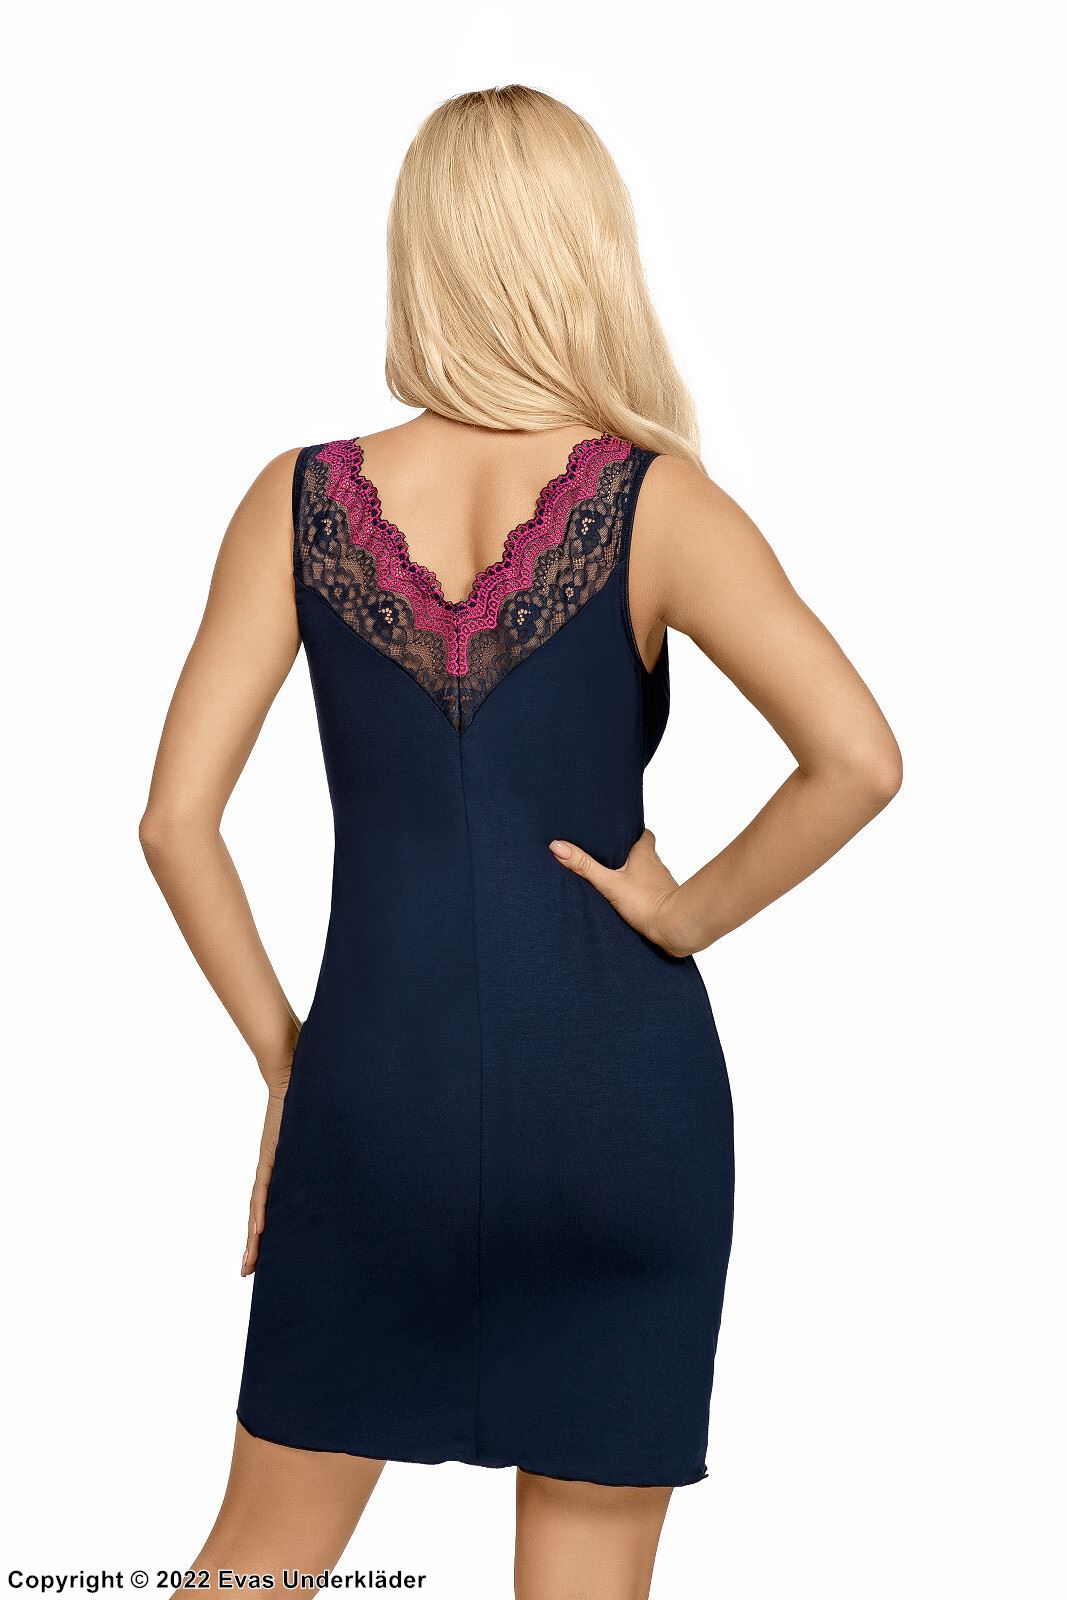 Romantic chemise, embroidery, lace inlays, V-neckline